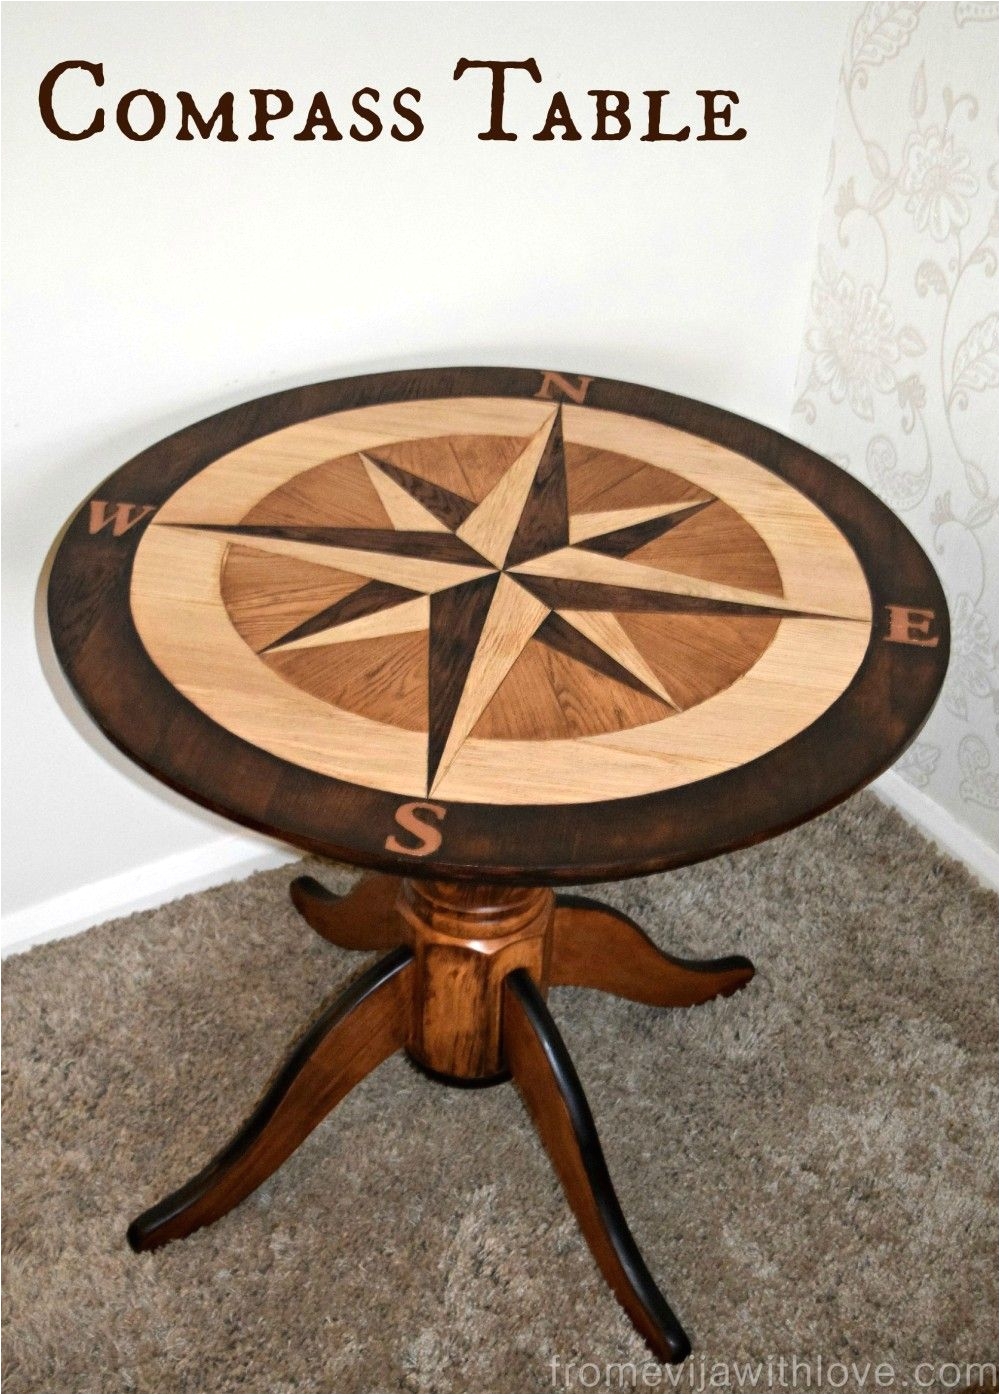 diy wood and stain compass rose table using floor planks cut out like a puzzle fabulous